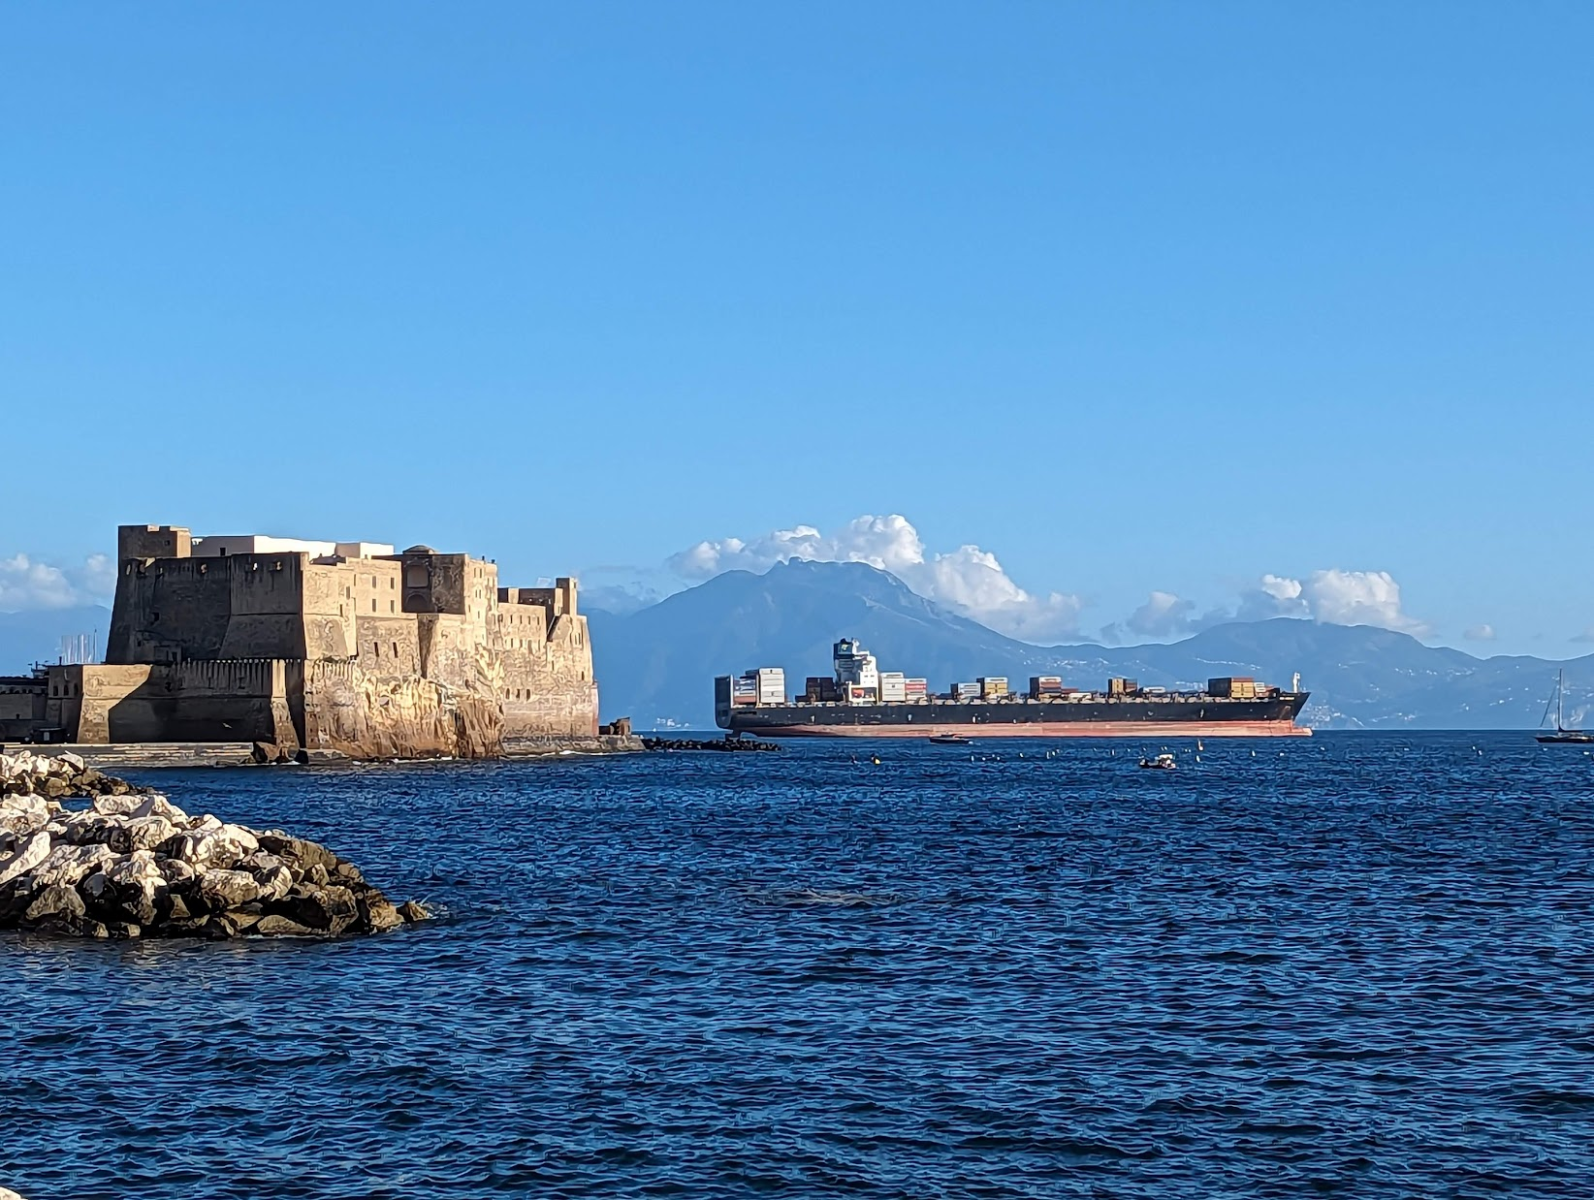 View of the gulf and Castel dell'Ovo from the Naples seafront